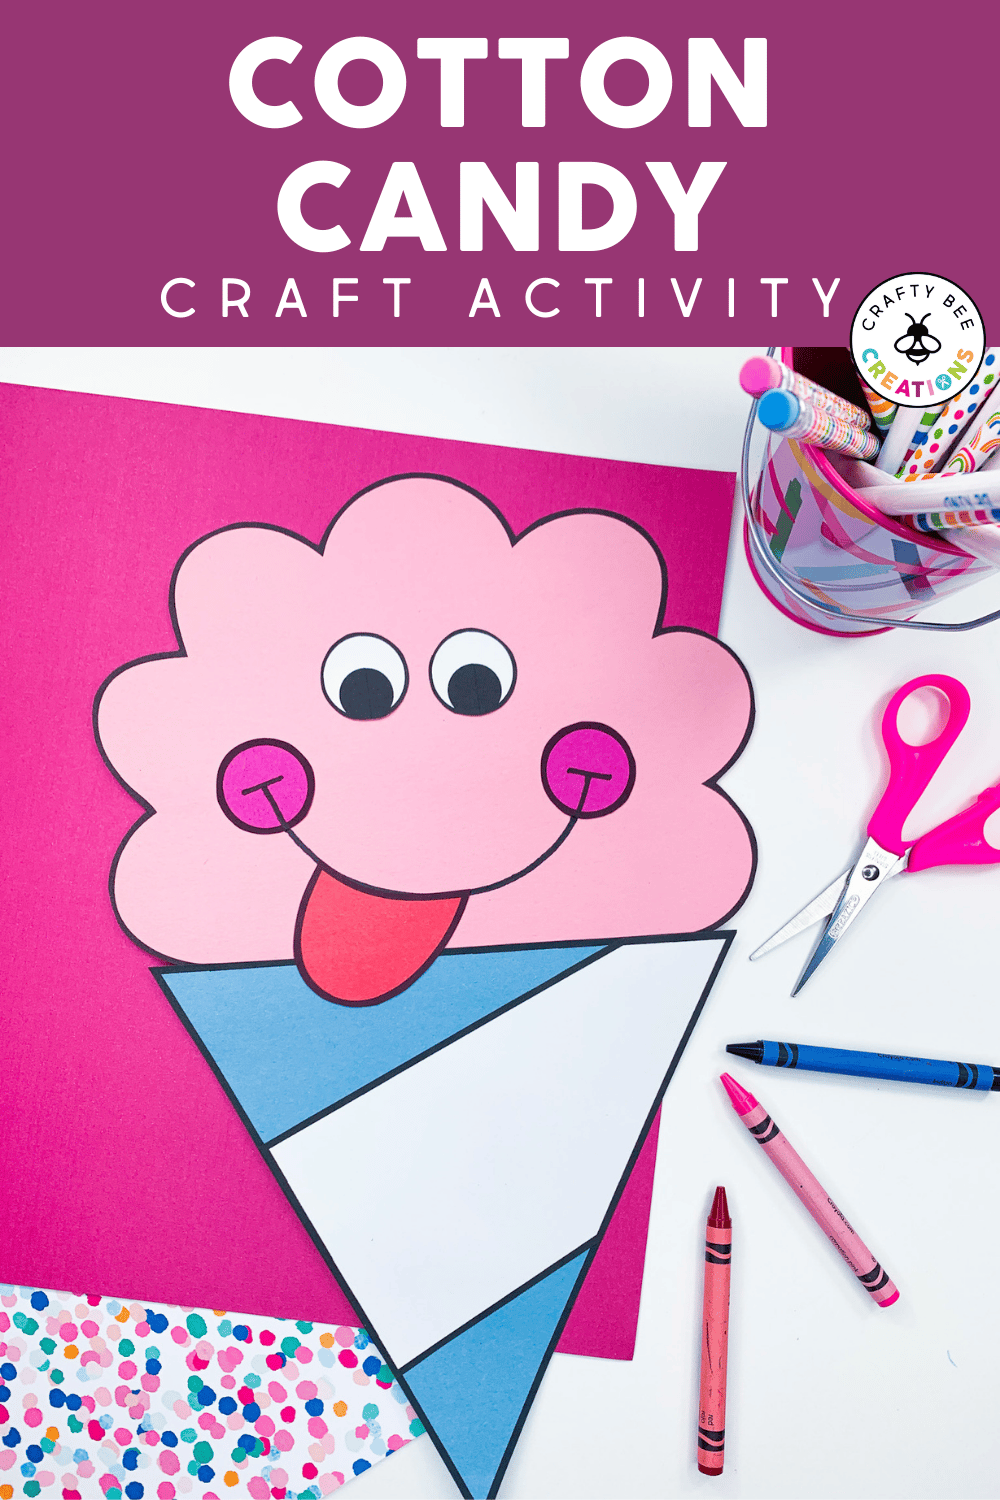 Cotton Candy Kids Craft Using Puffy Paint - Crafty Morning